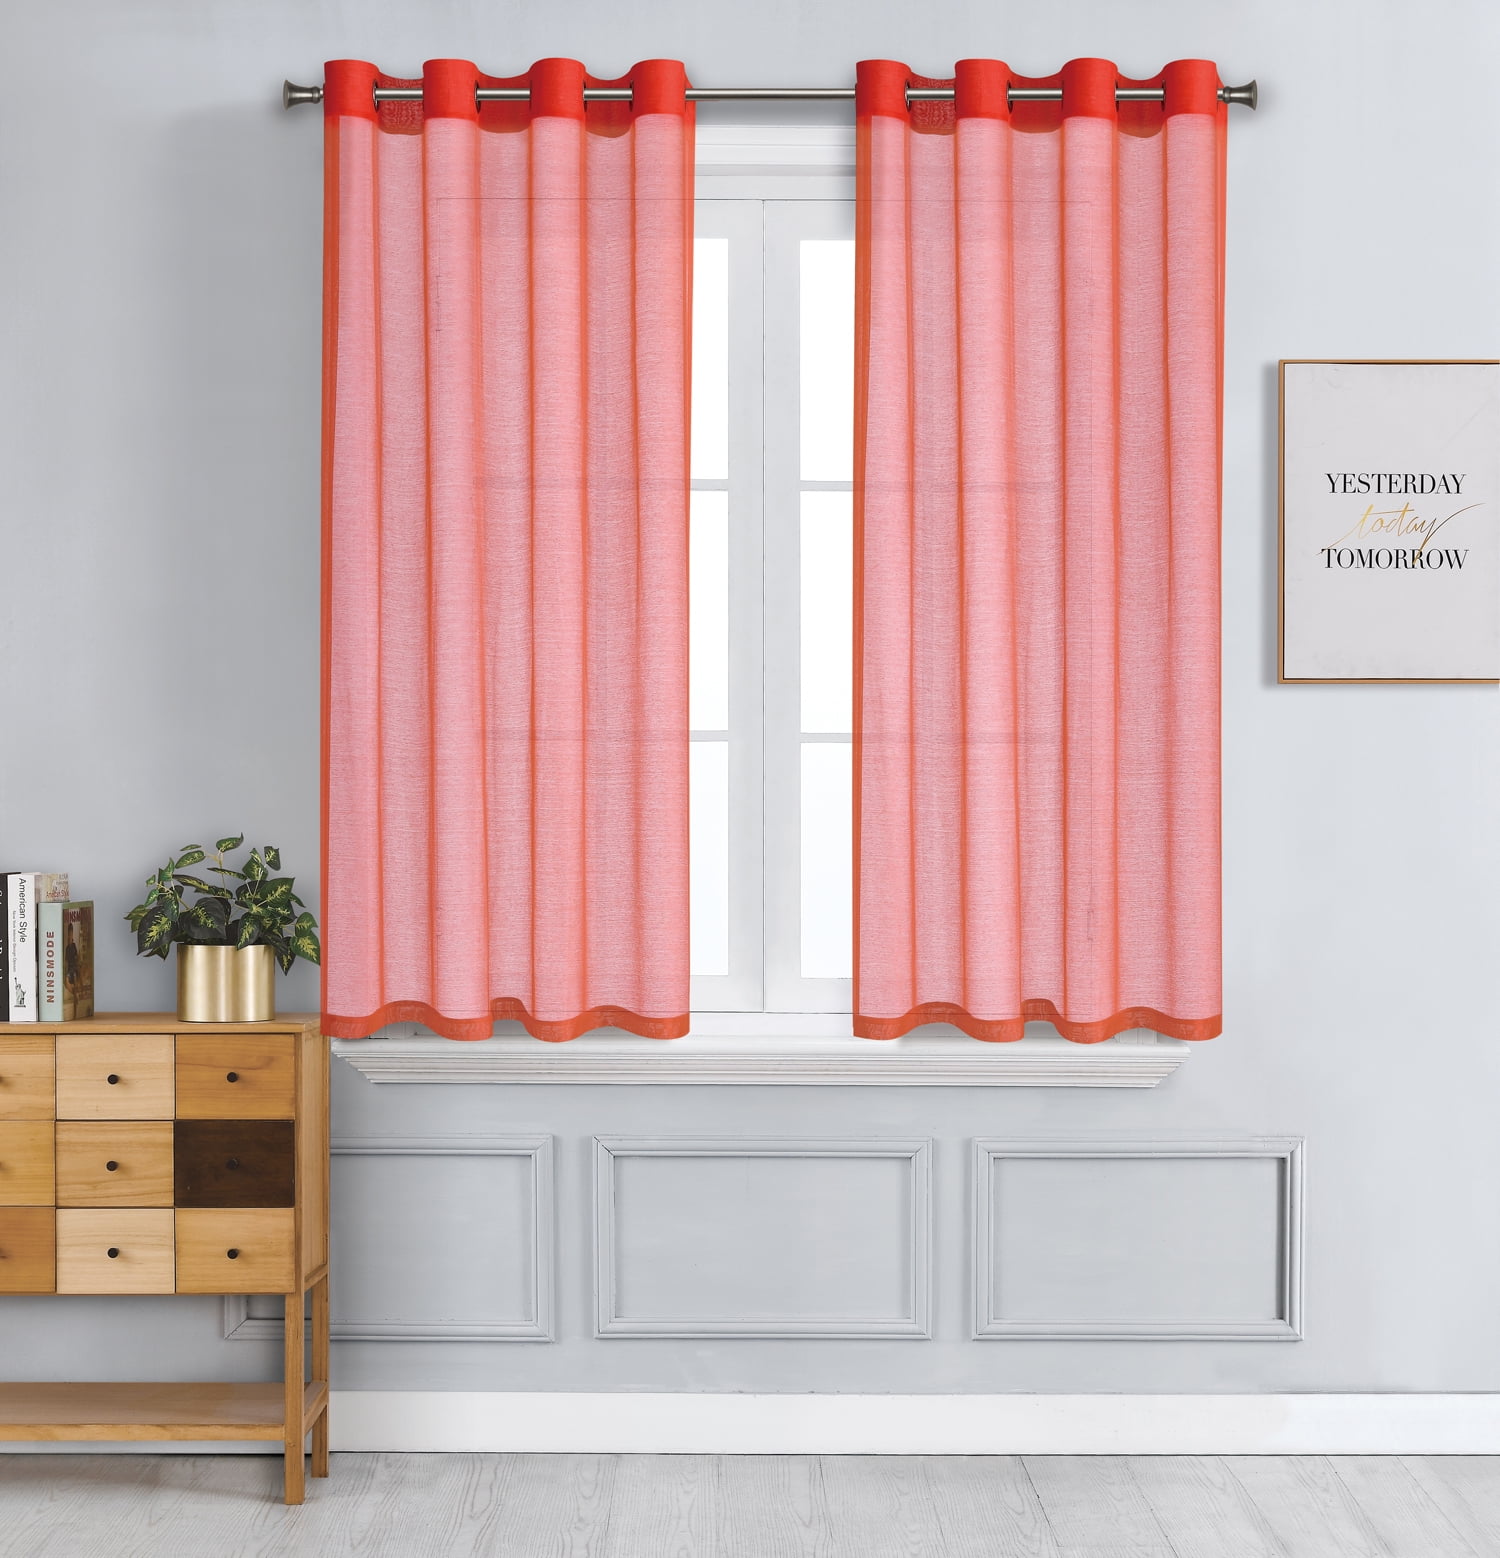 WPM Red Sheer Window Curtain Panels for Bedroom, Kitchen, Kids Room ...